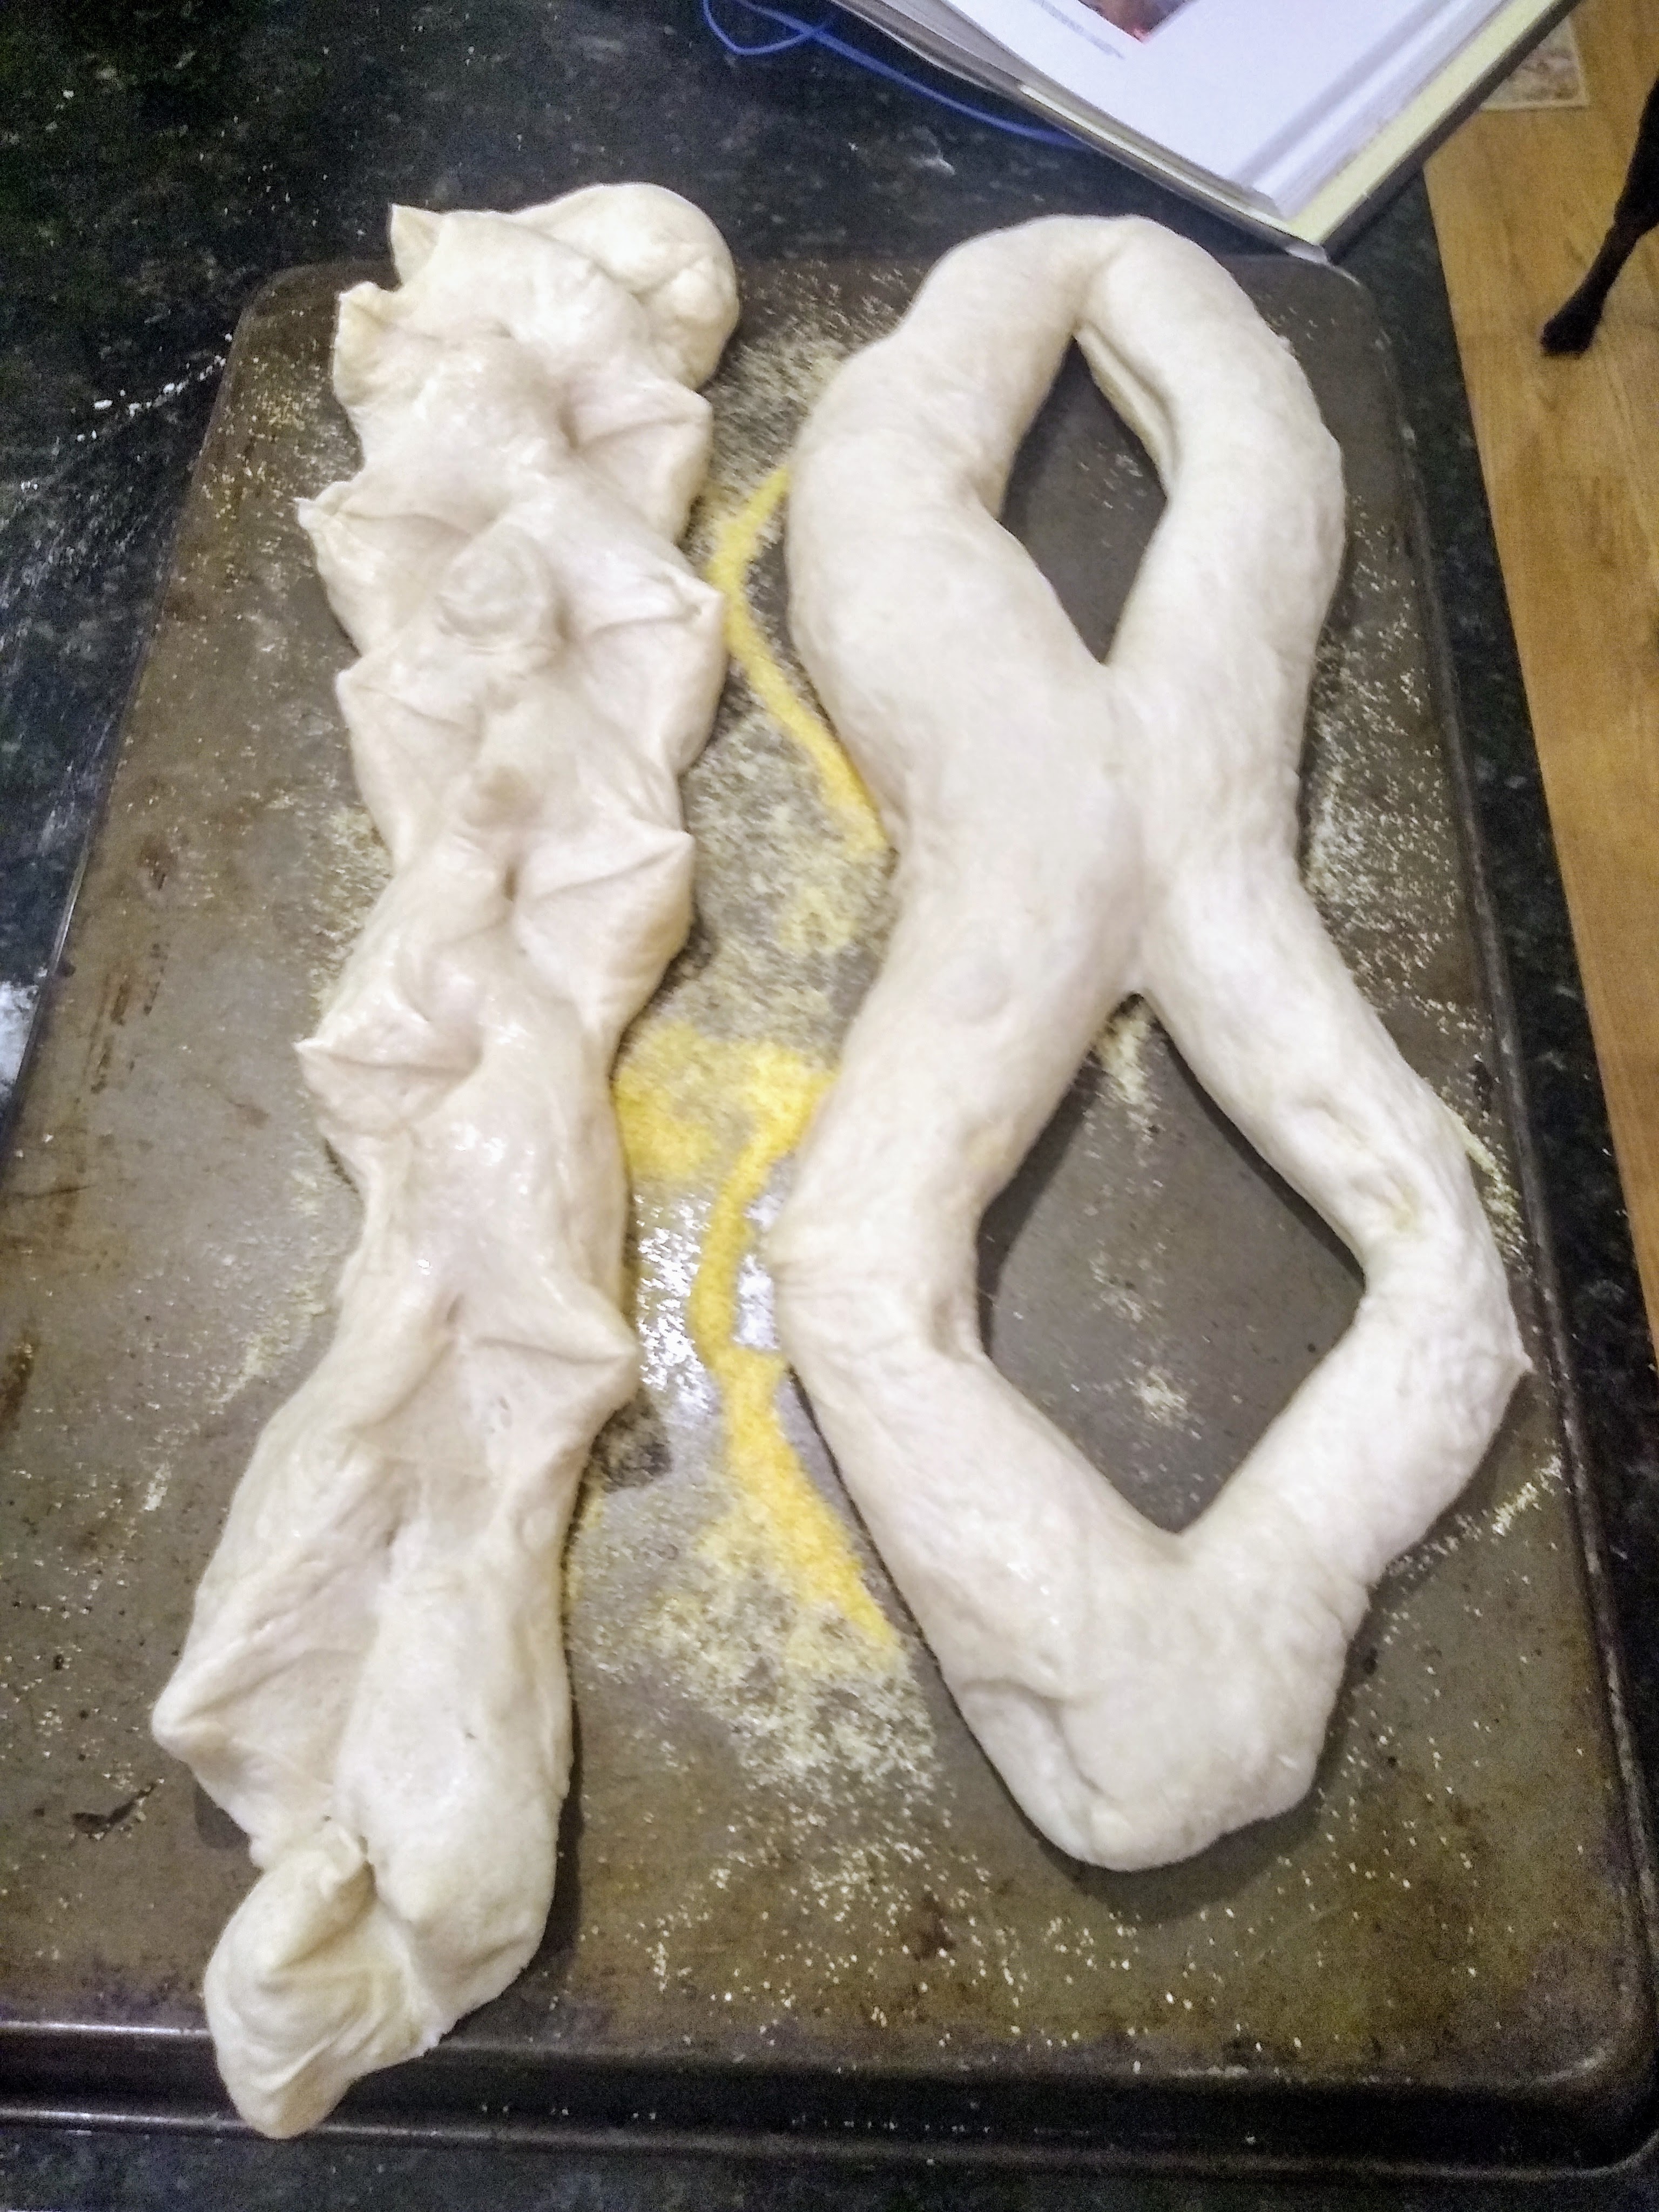 The Epi and Fougasse, pre-baking.